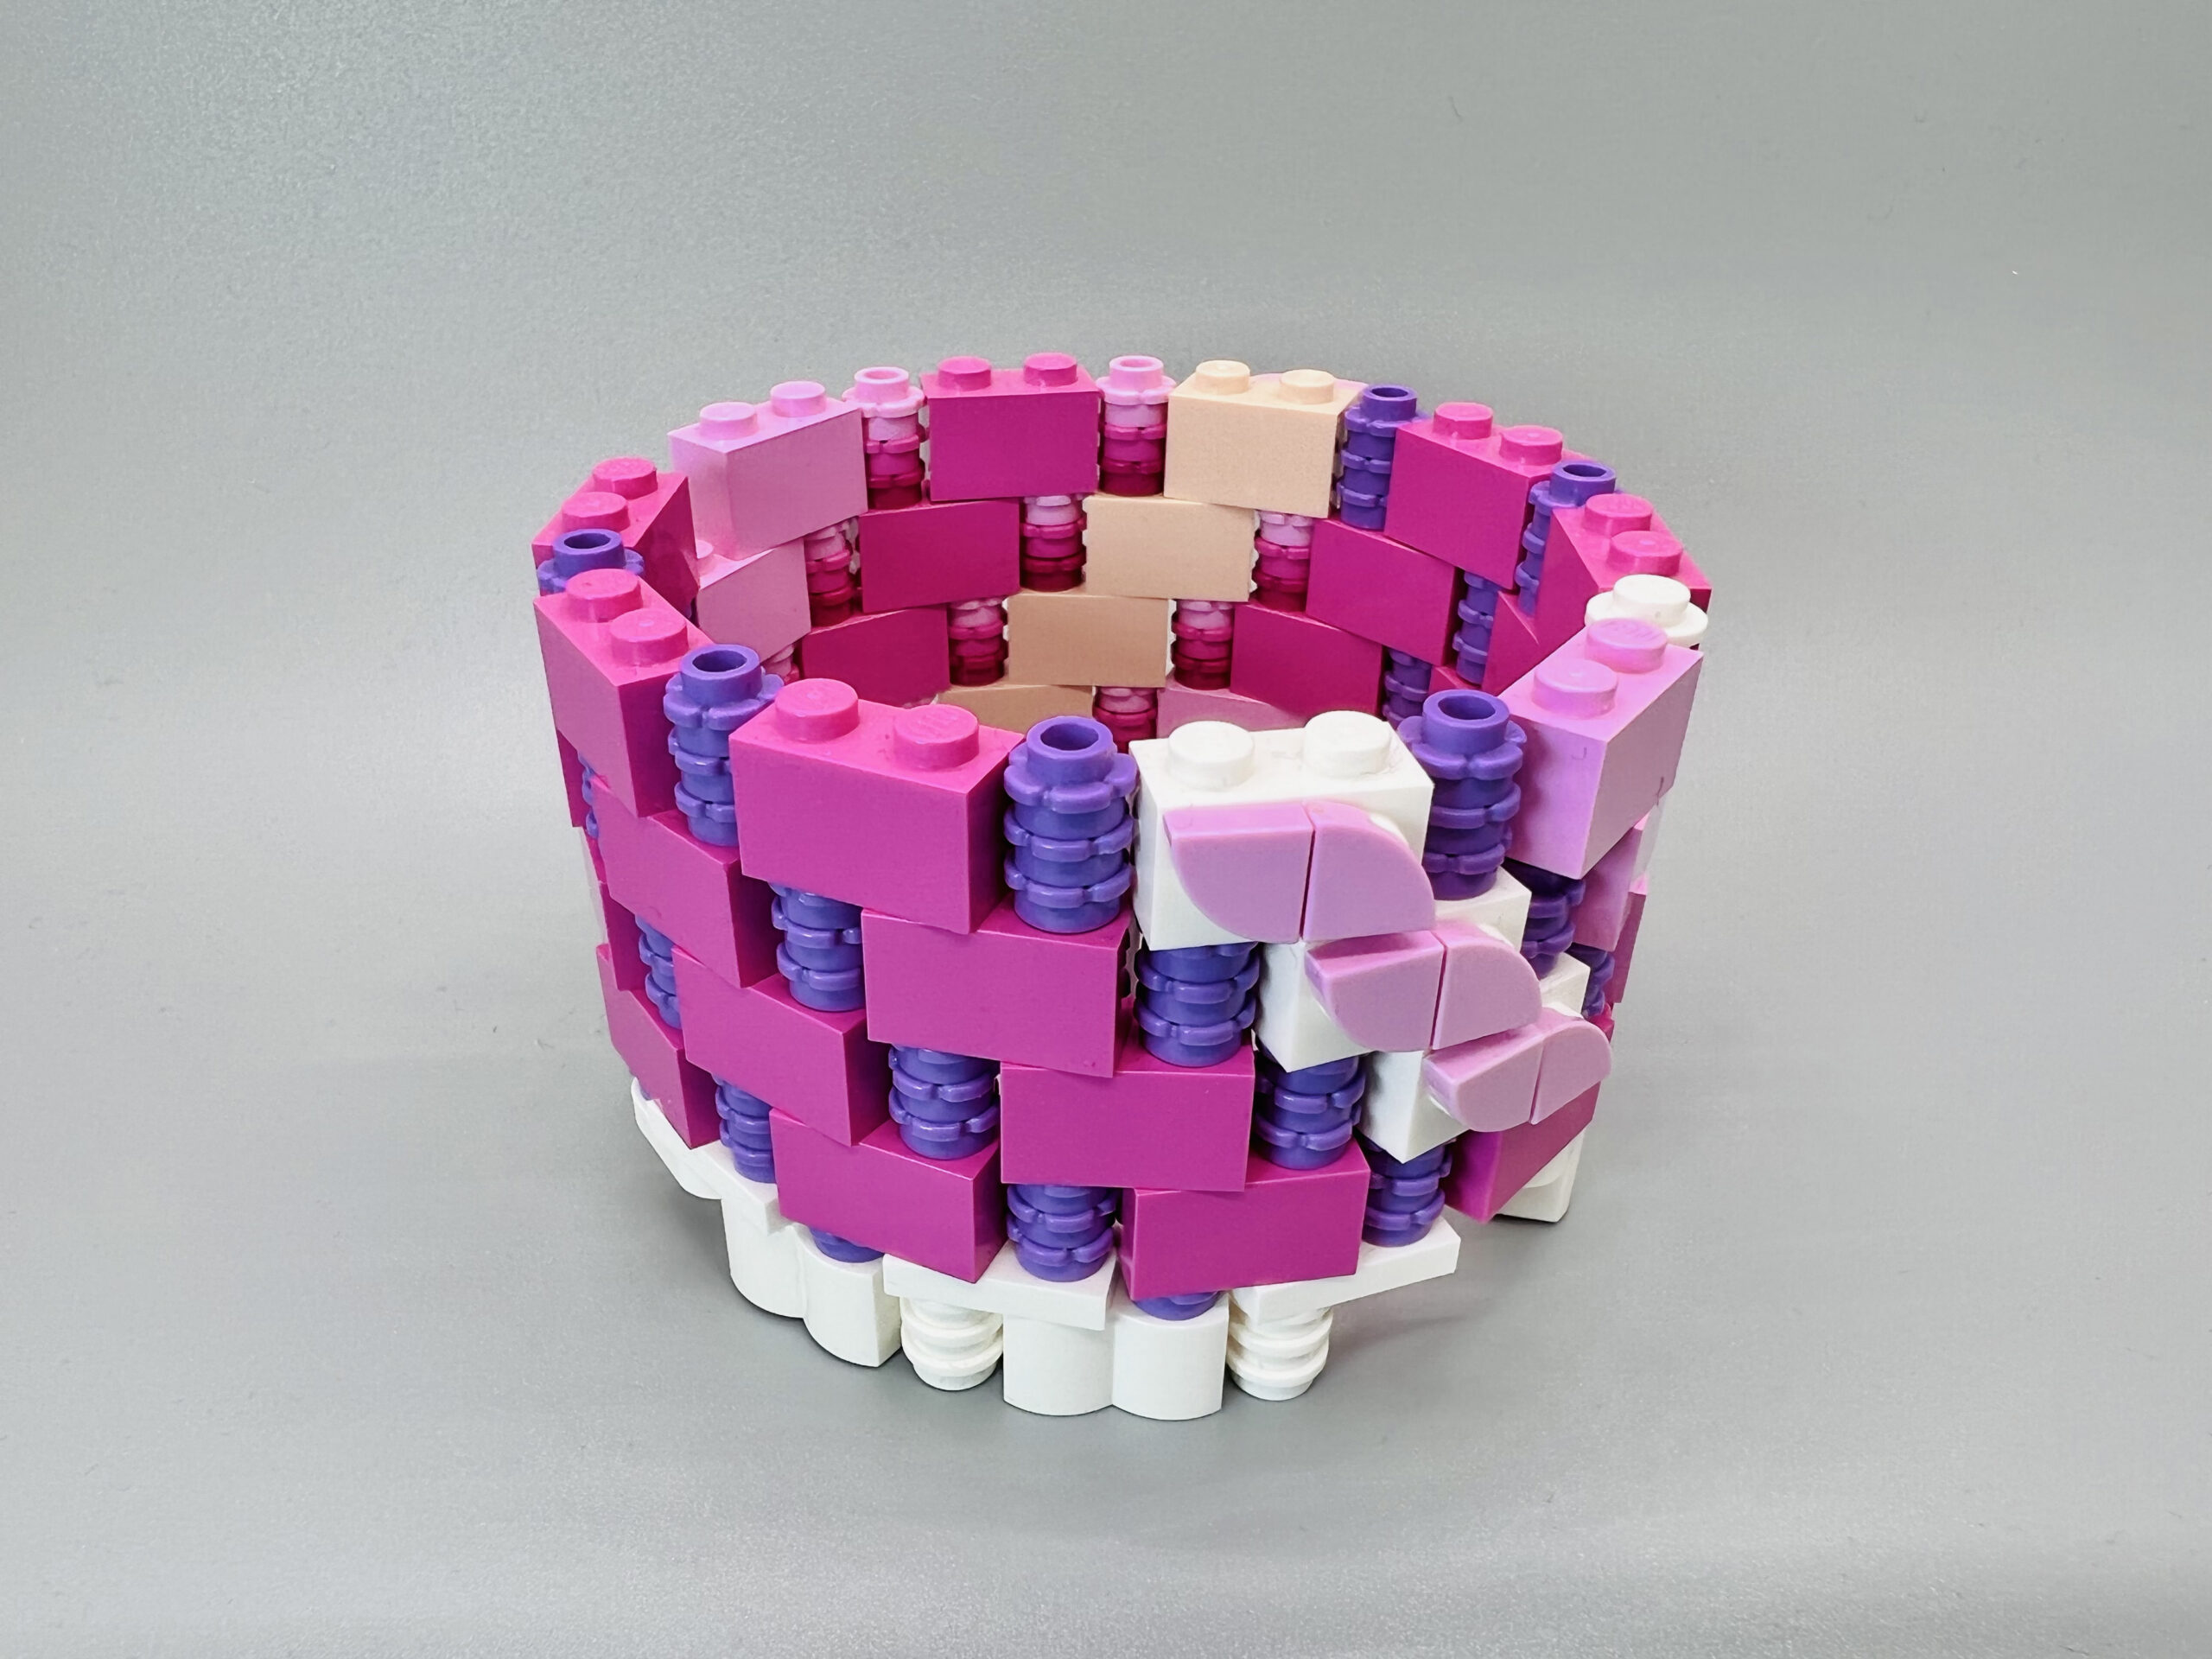 Hoops made of repeating 2x1 bricks and 1x1 round plates.